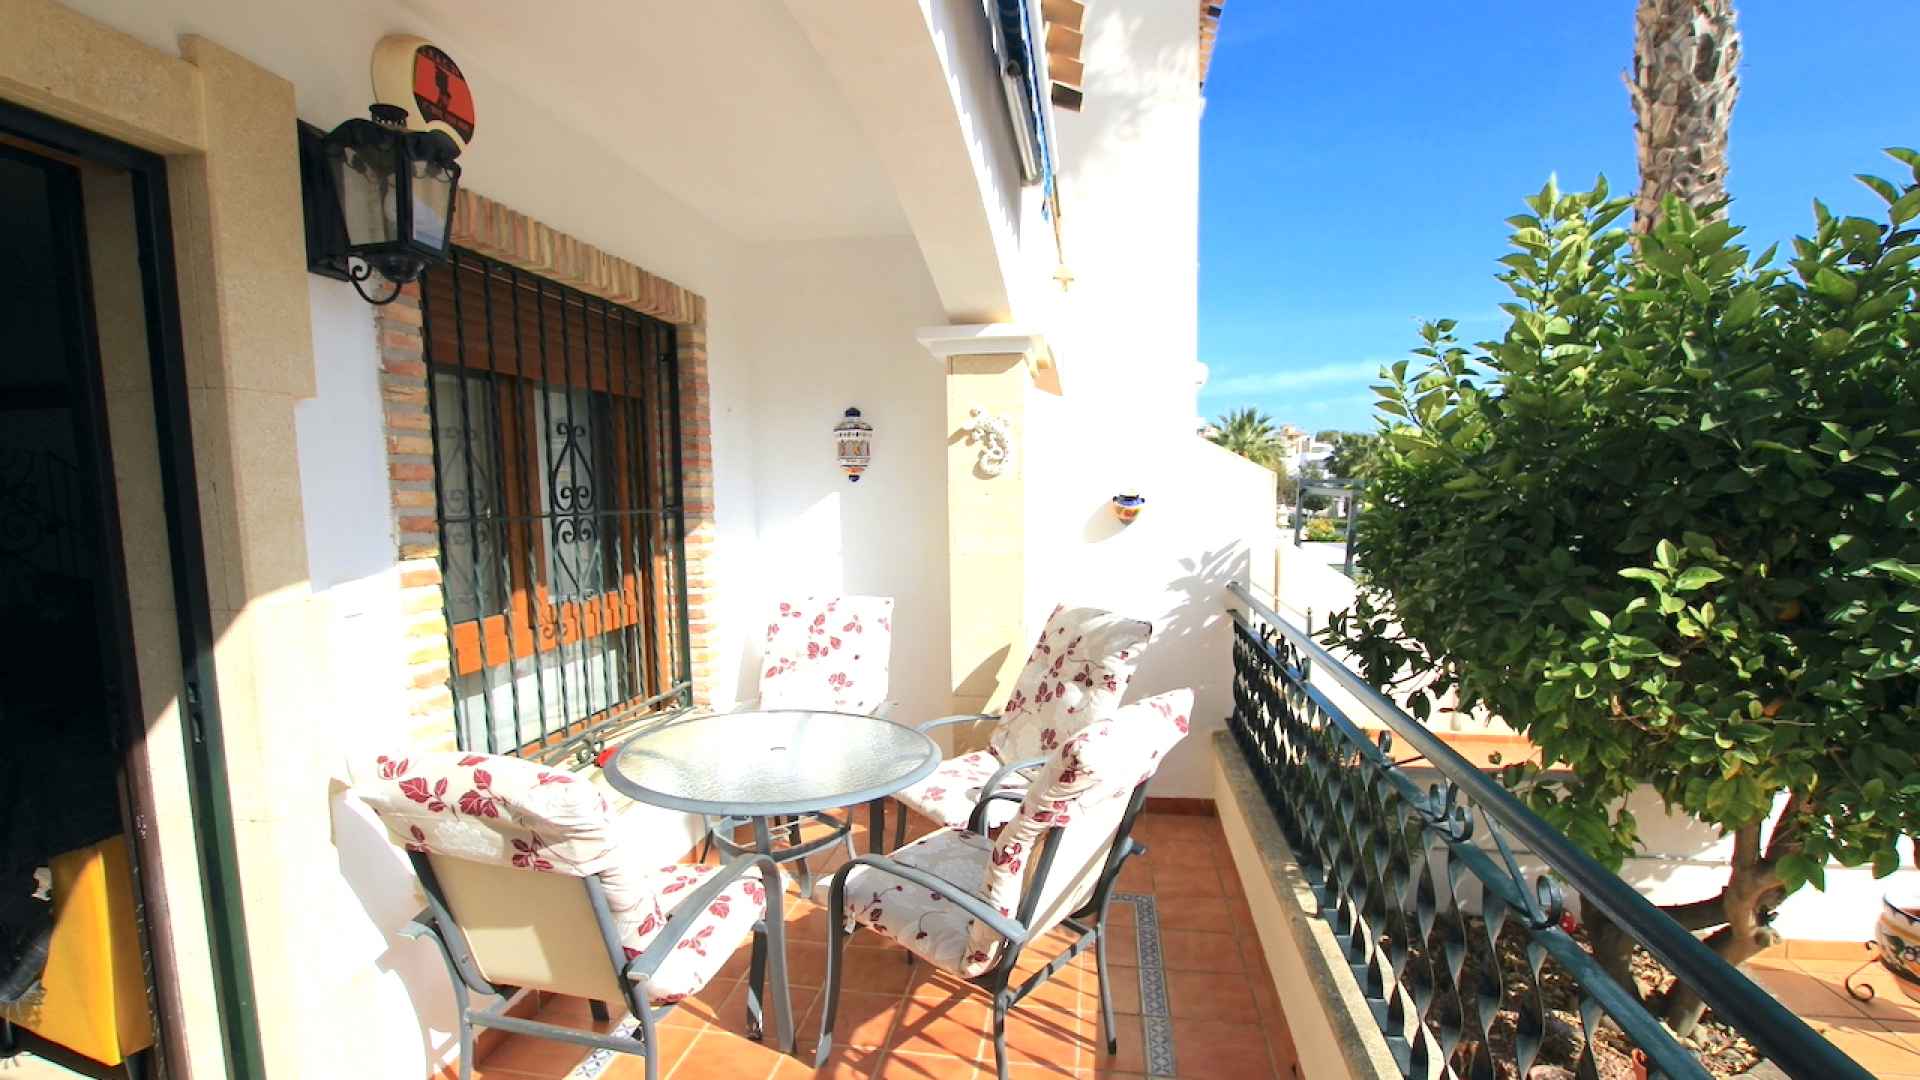 48344_superior_3_bed_2_bath_townhouse_with_pool_views_(pau_8)_080224142634_img_6486